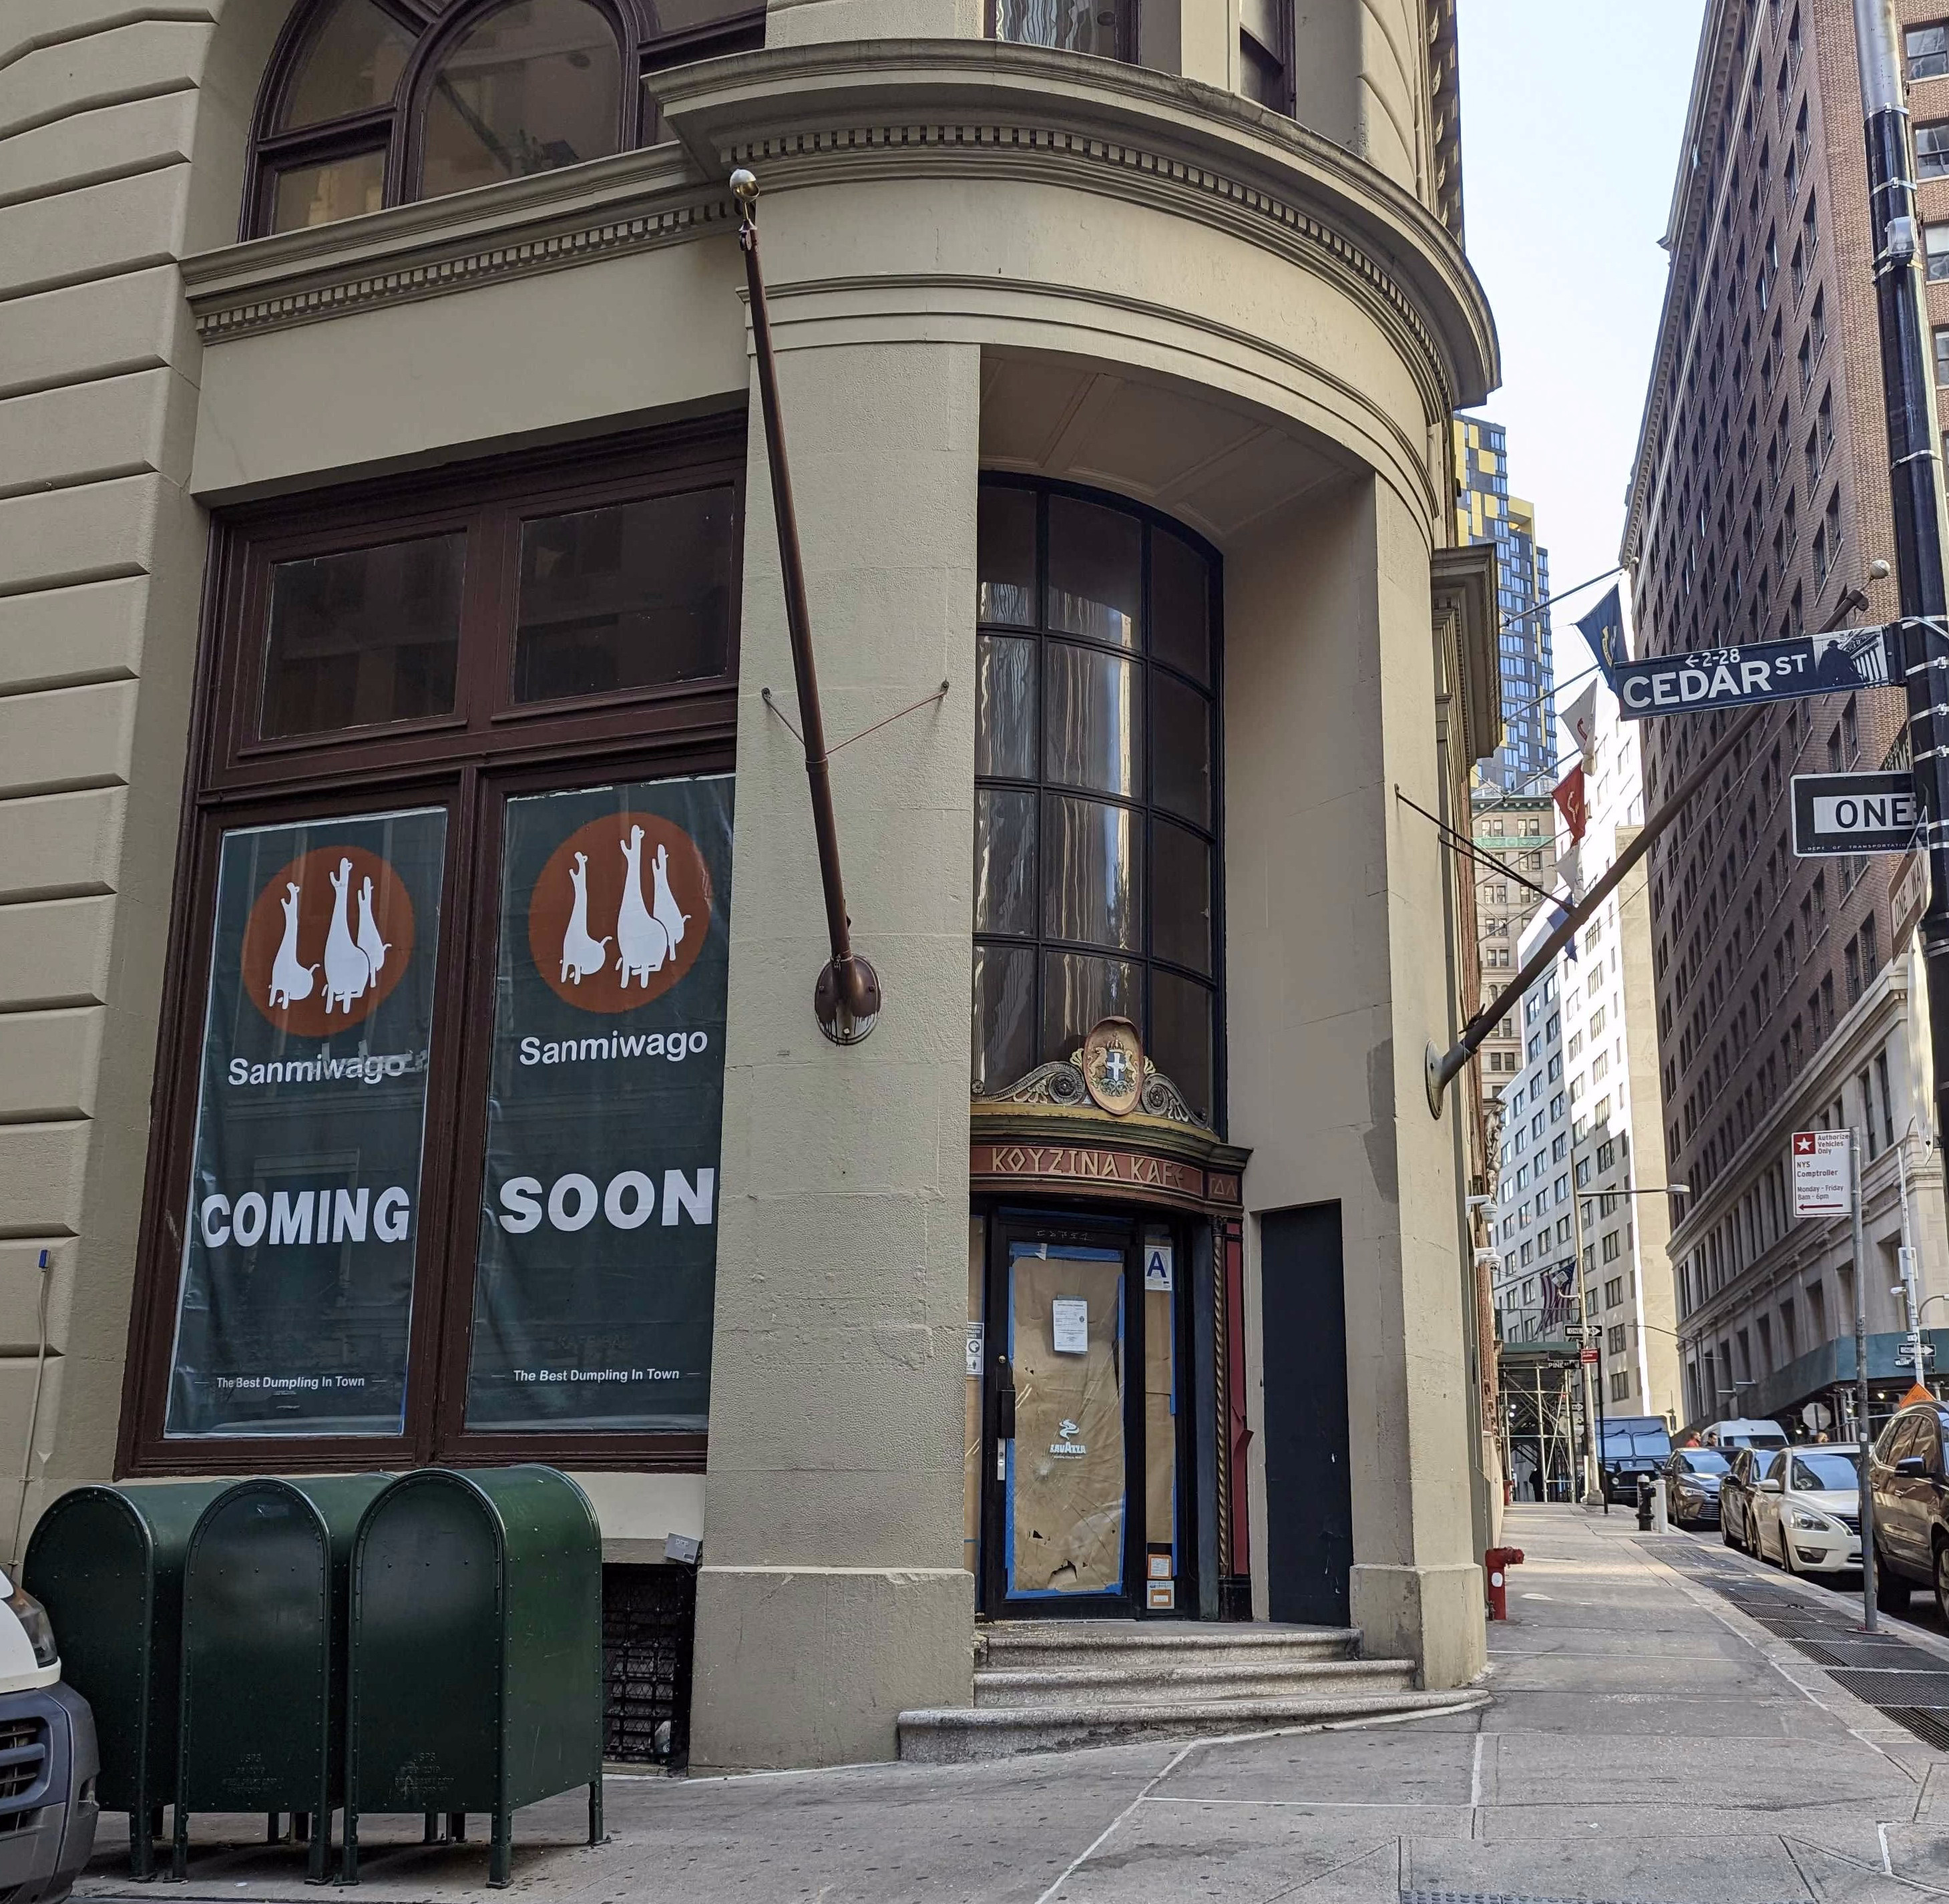 A restaurant, Sanmiwago, has “coming soon” signs on a building in the Financial District.